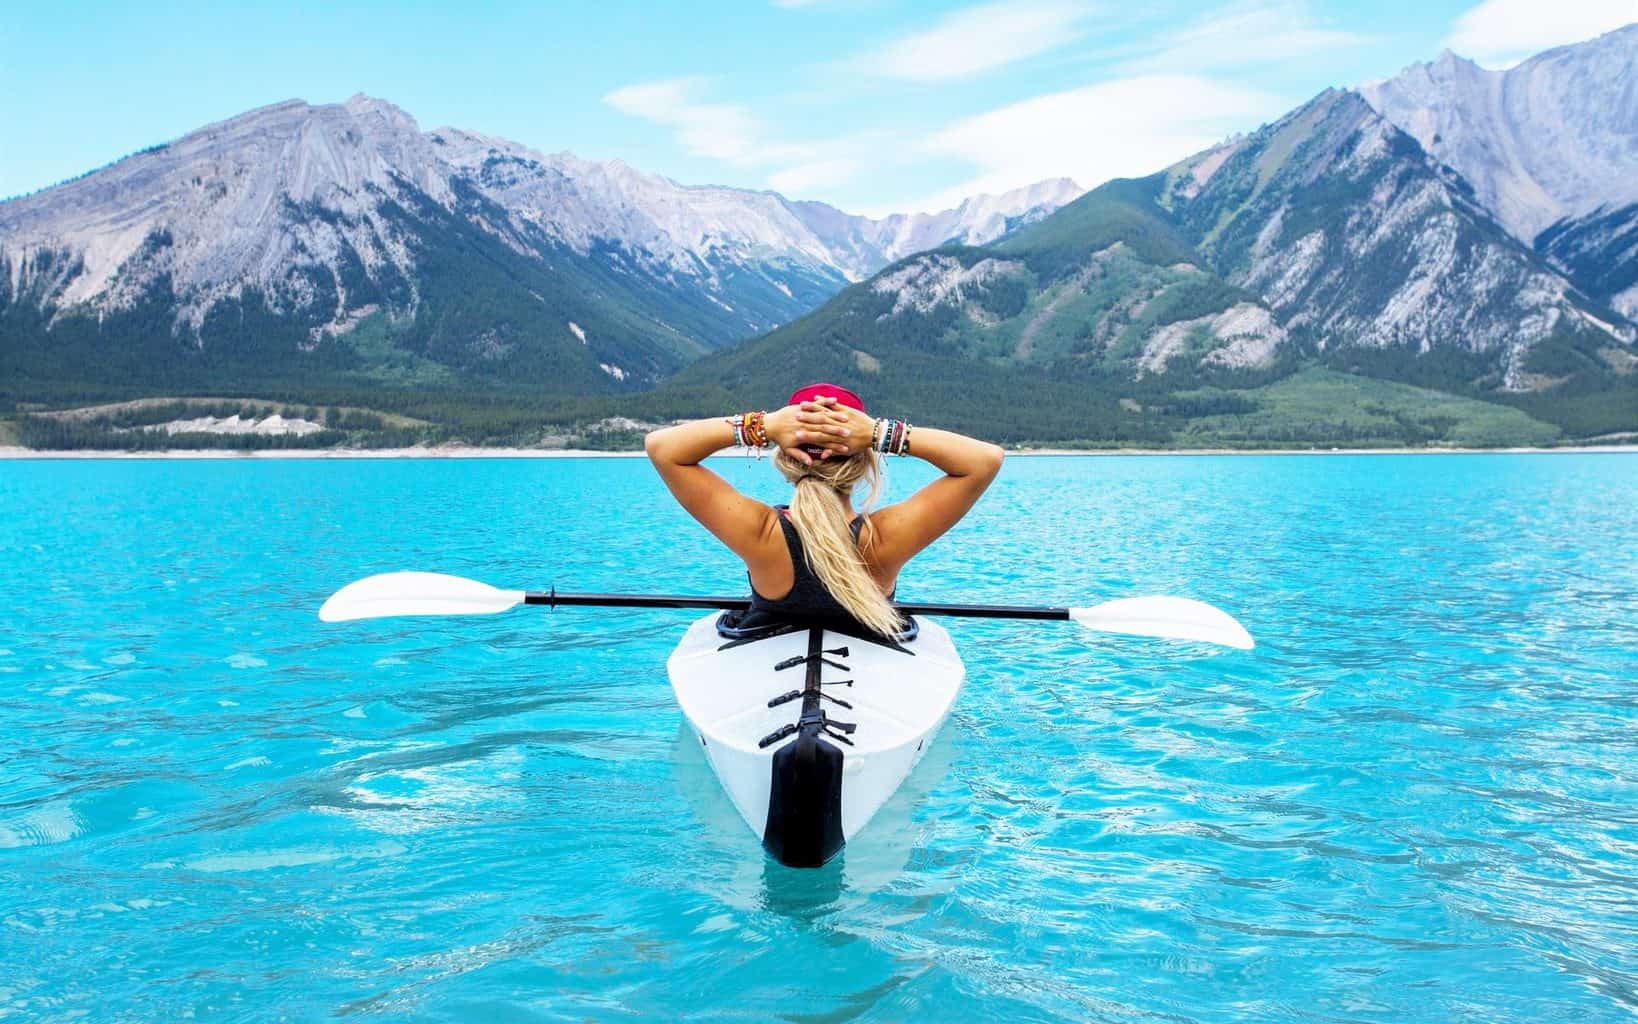 When Is It Too Windy for Kayaking? (Crucial Facts You Should Know)